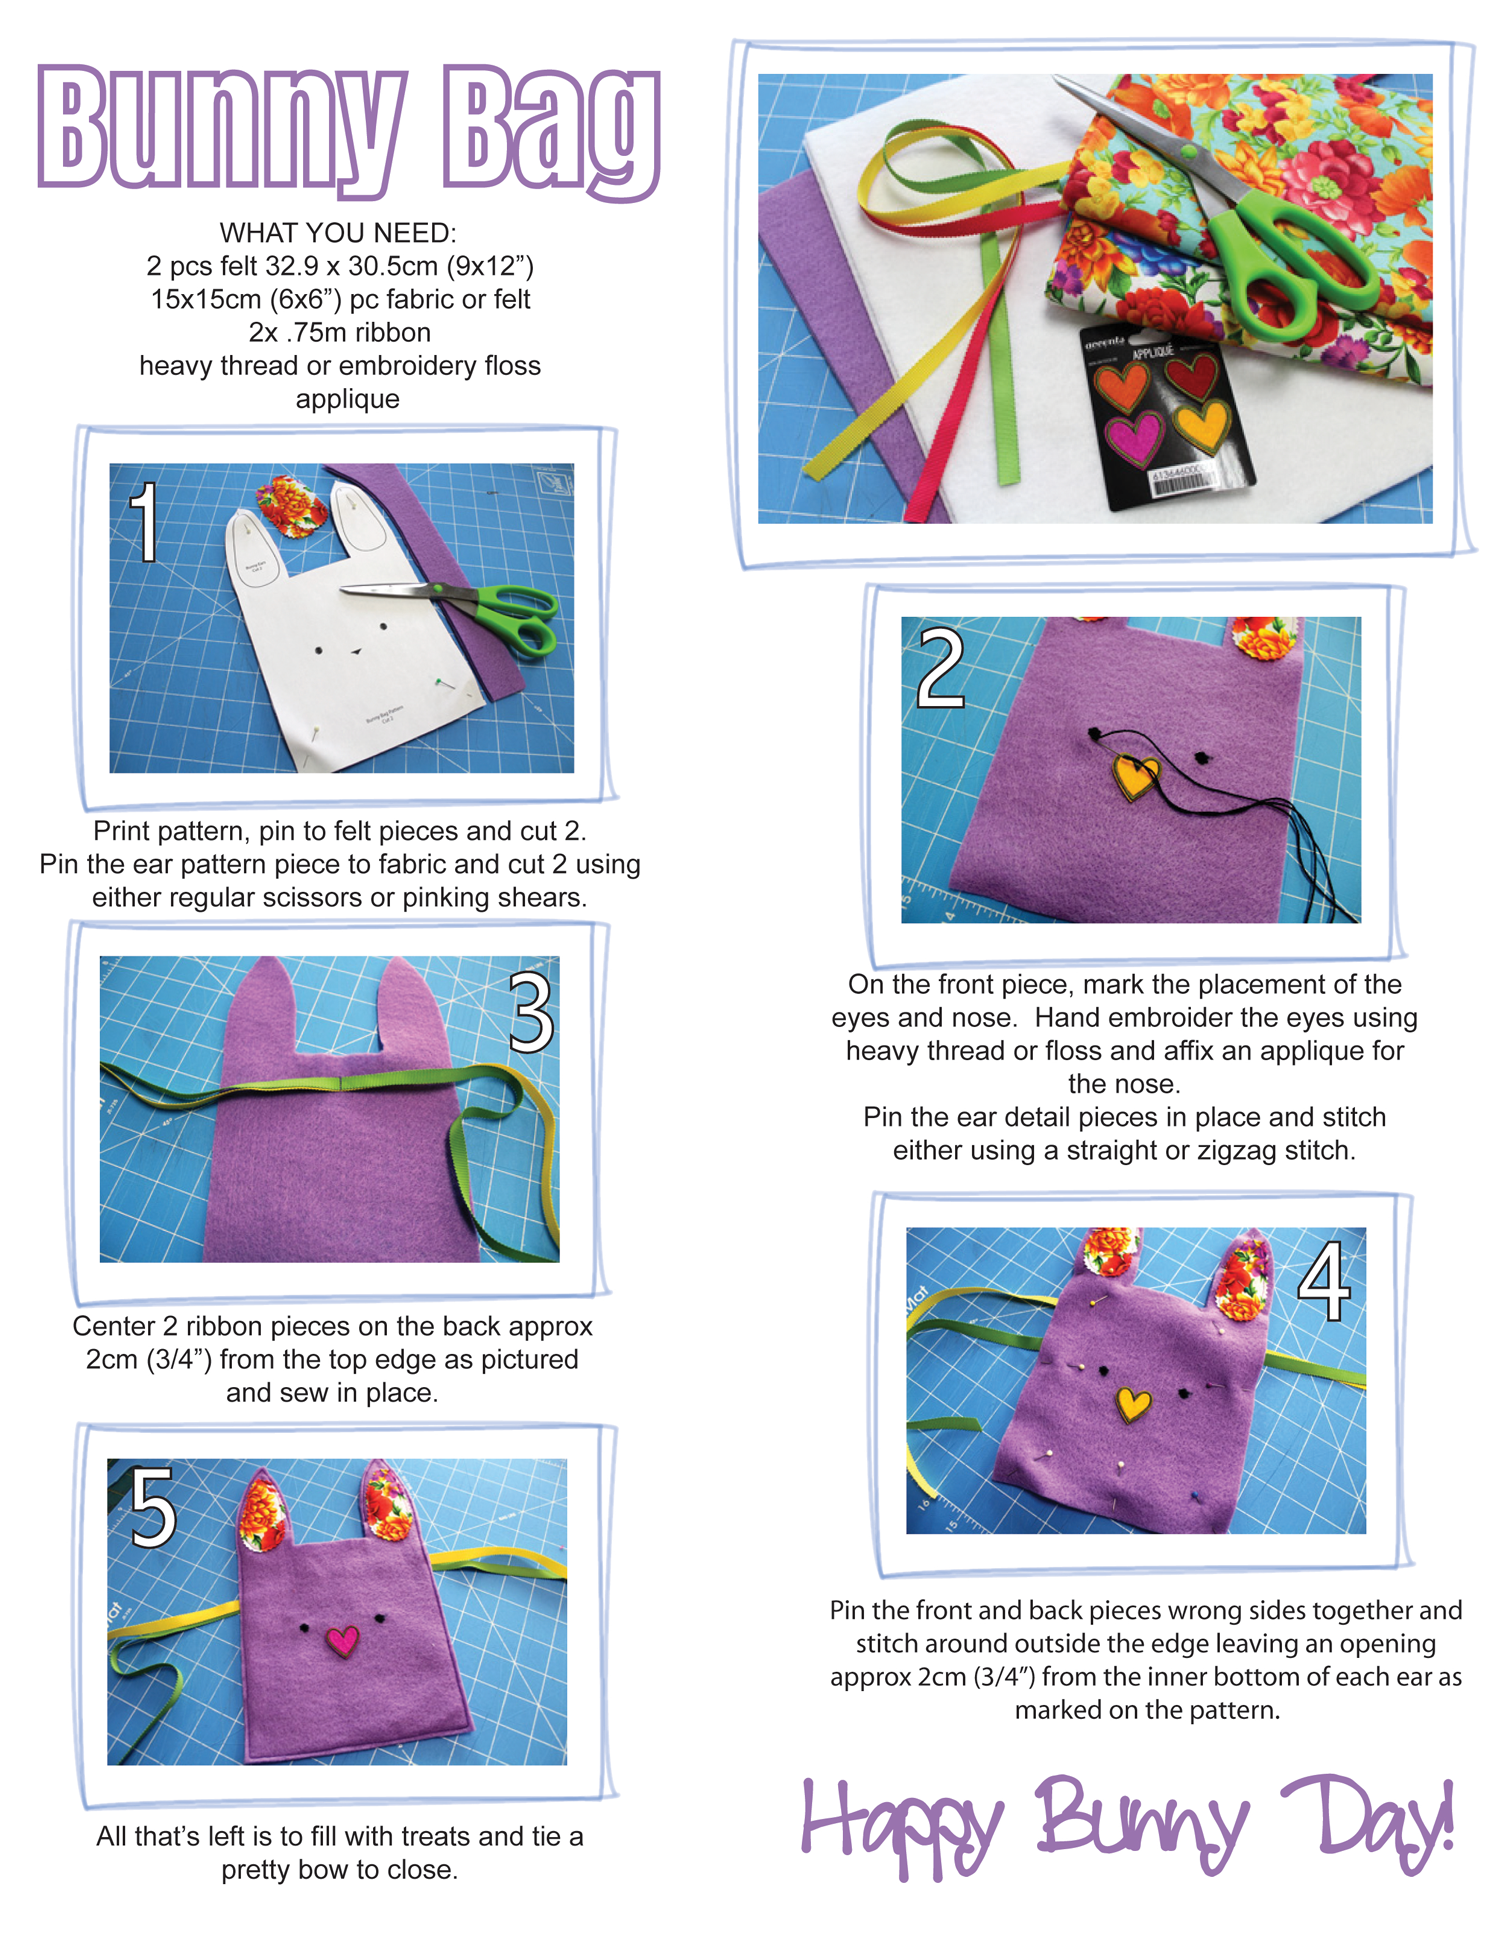 Materials & steps to create your Easter bunny bags.